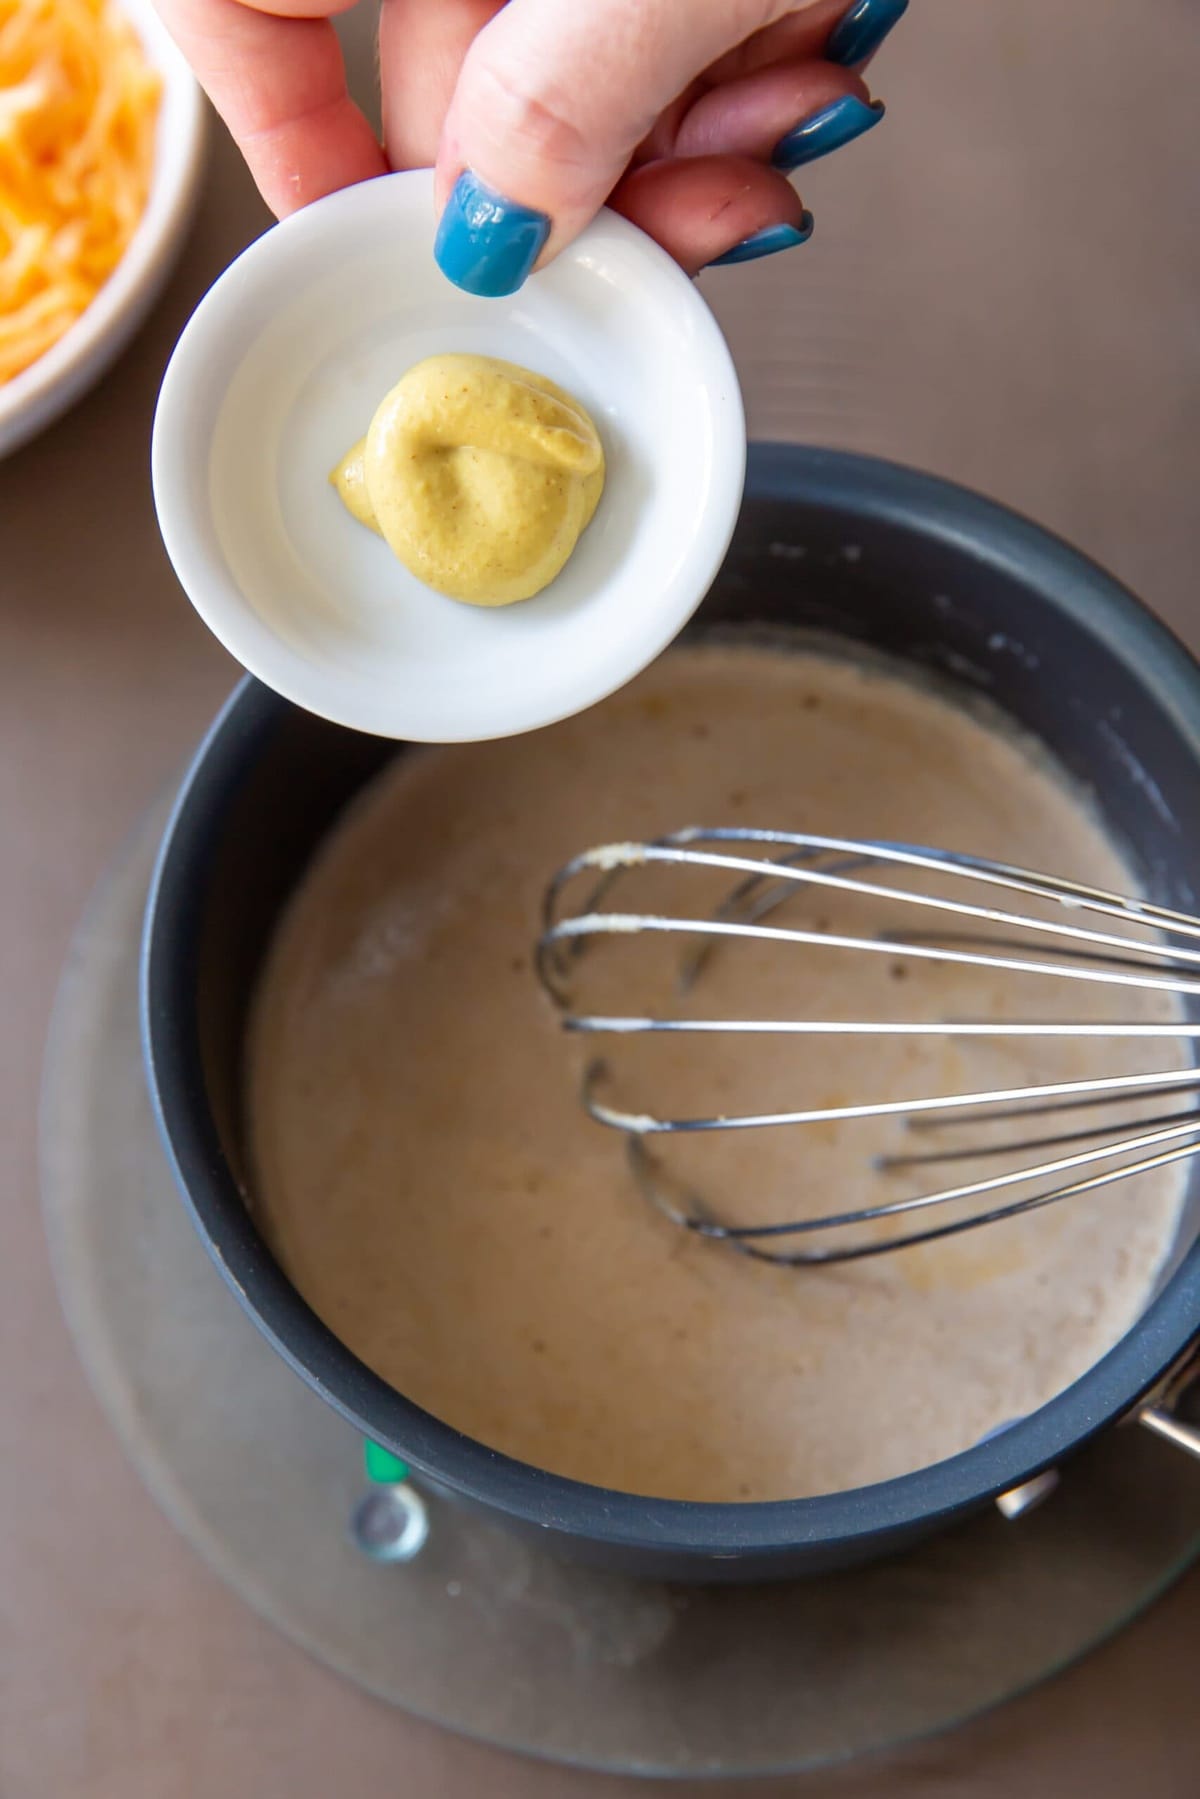 Adding Dijon mustard to the mixture while maintaining a continuous whisking motion to make sure it's evenly blended.




